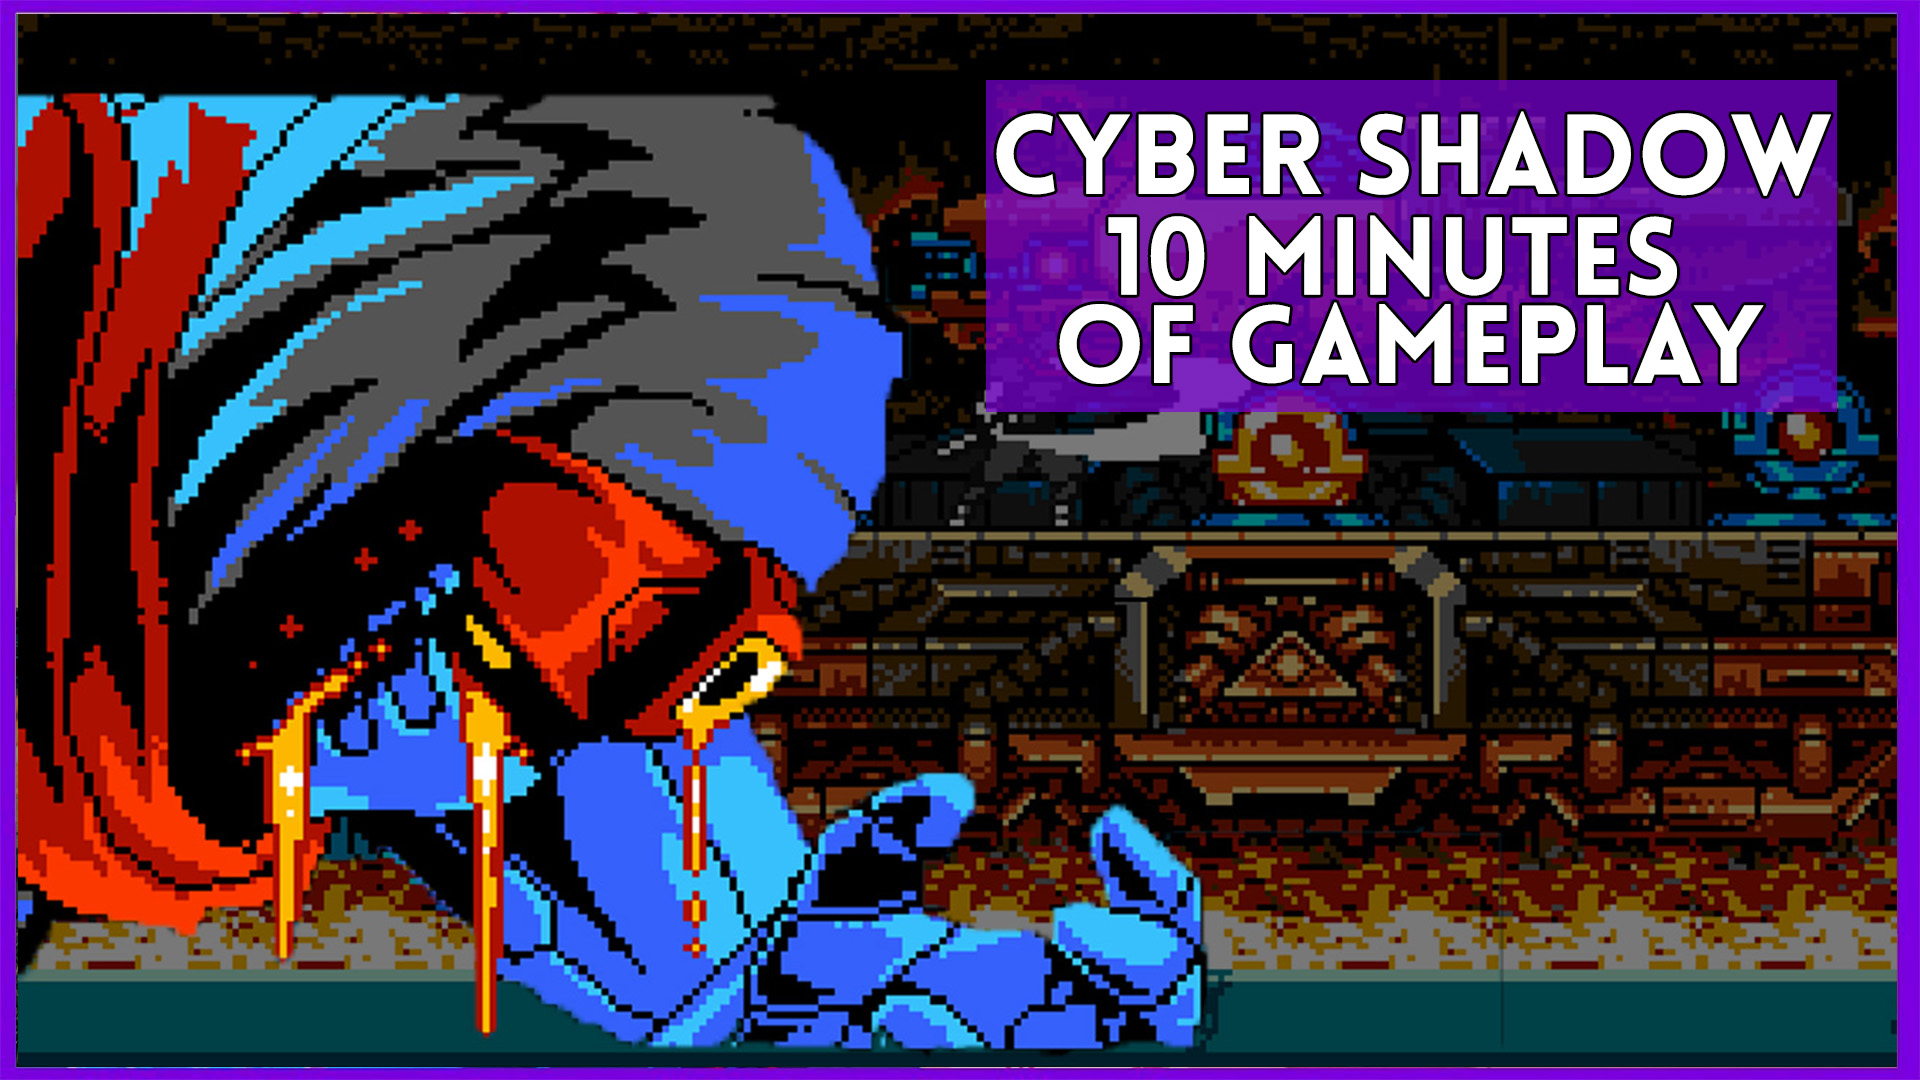 cyber shadow initial release date